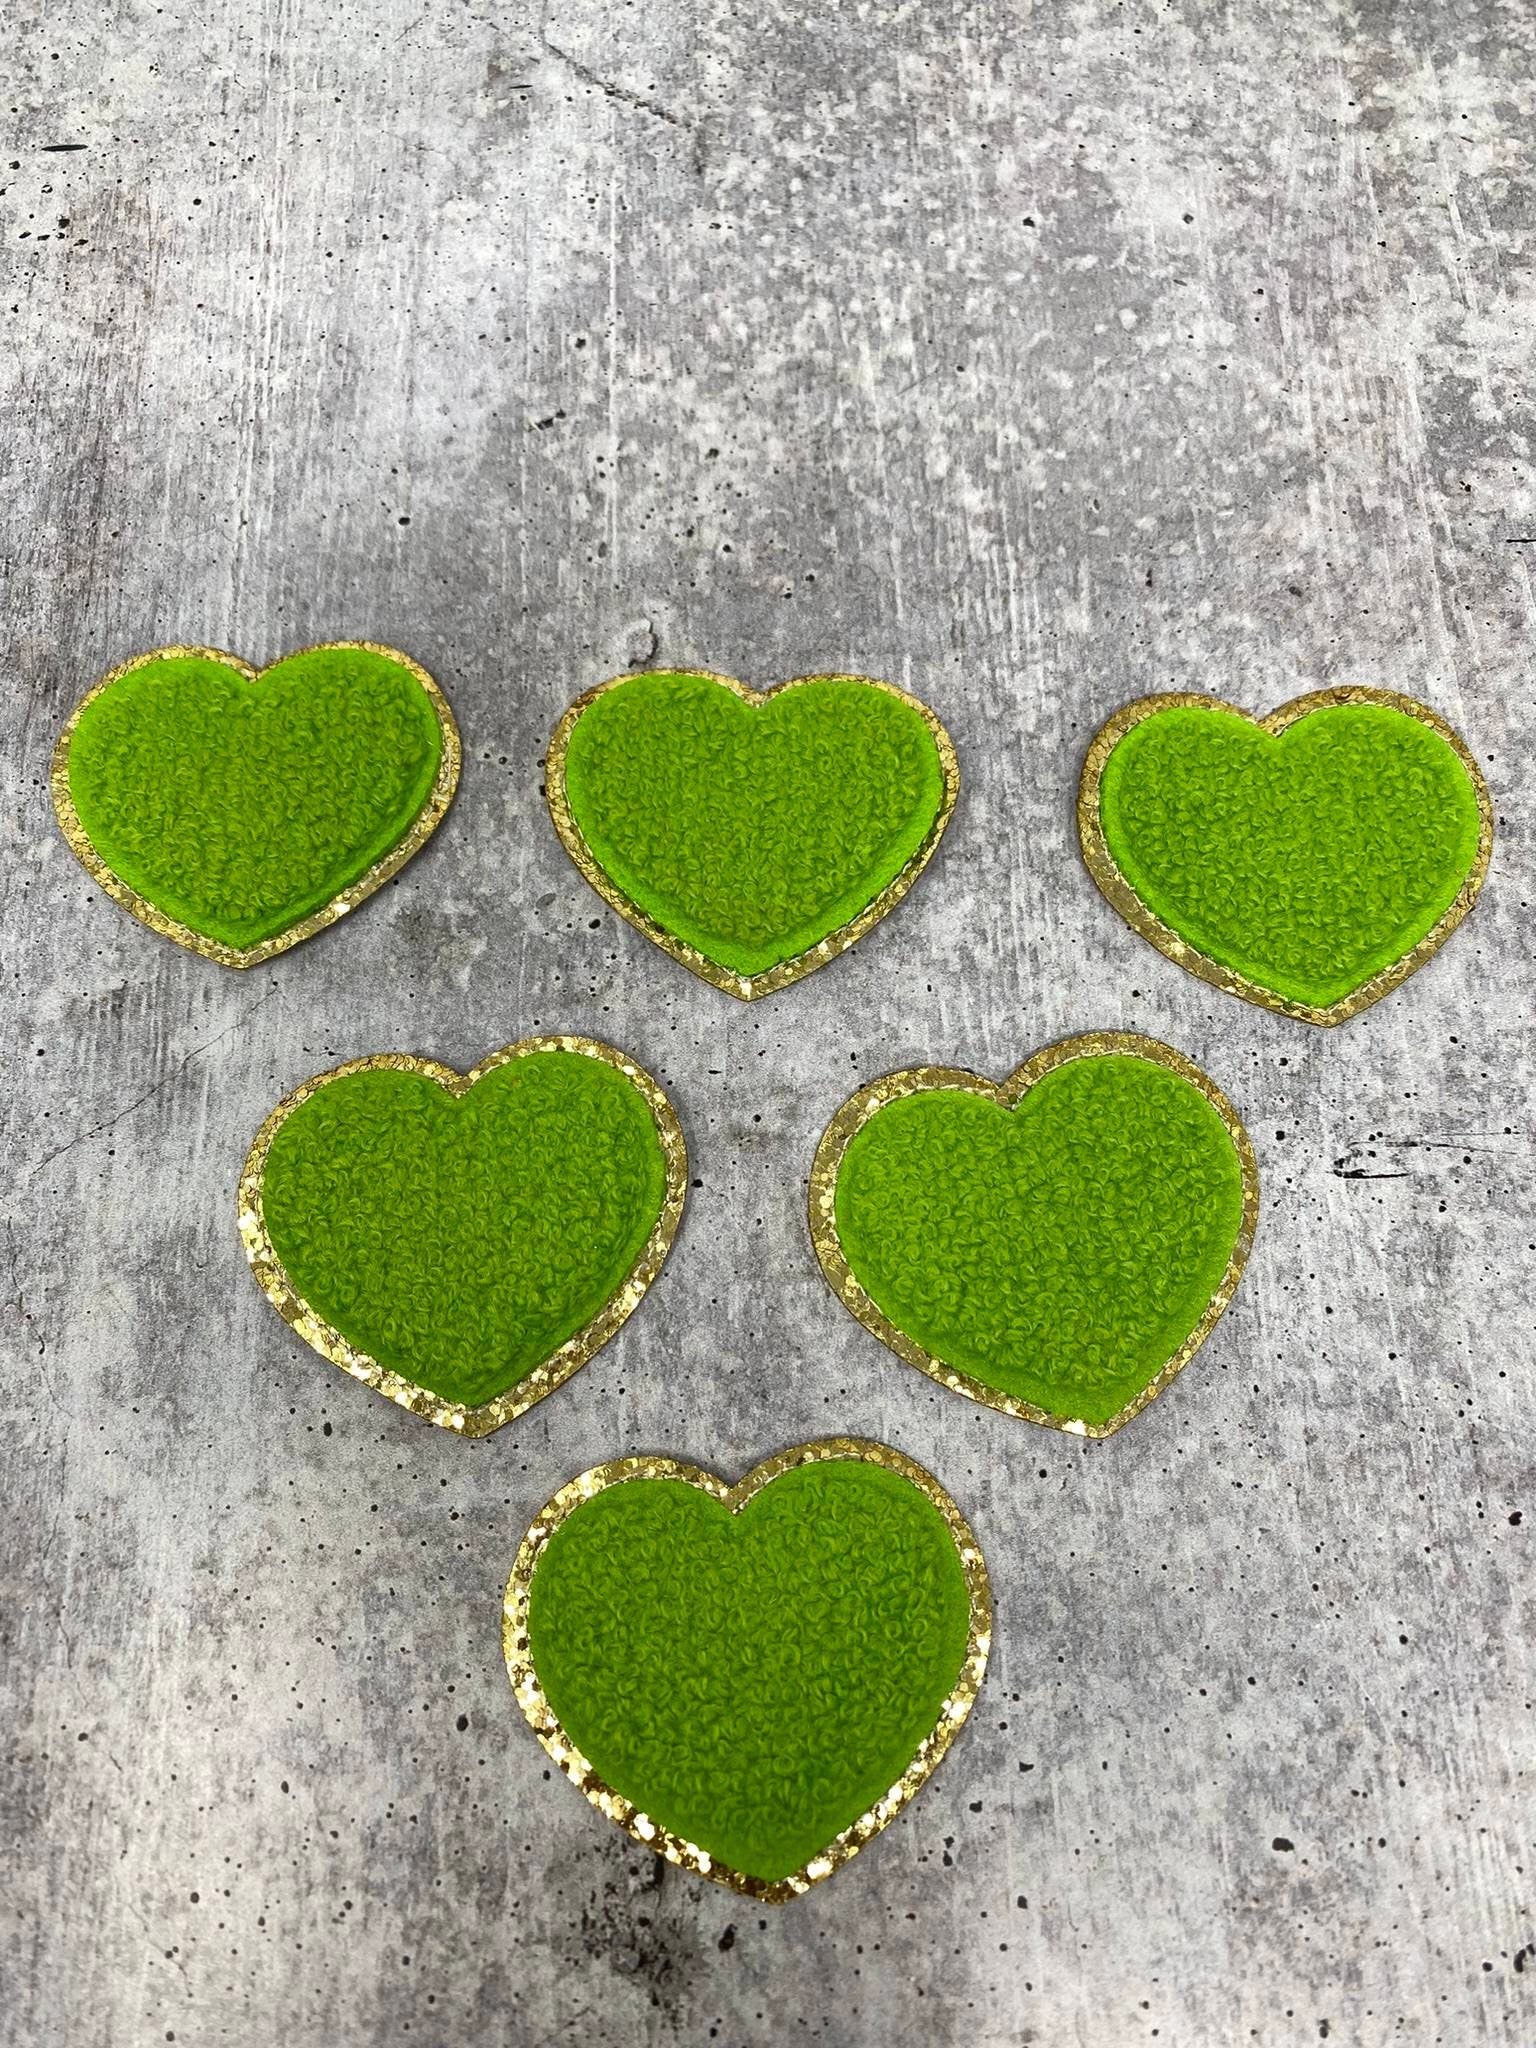 New: Green, Chenille 1-pc "Heart Patch" w/Gold Glitter, Size 2.5", Love Patch with Iron-on Backing, Fuzzy Applique, Iron-on Patch for Girls